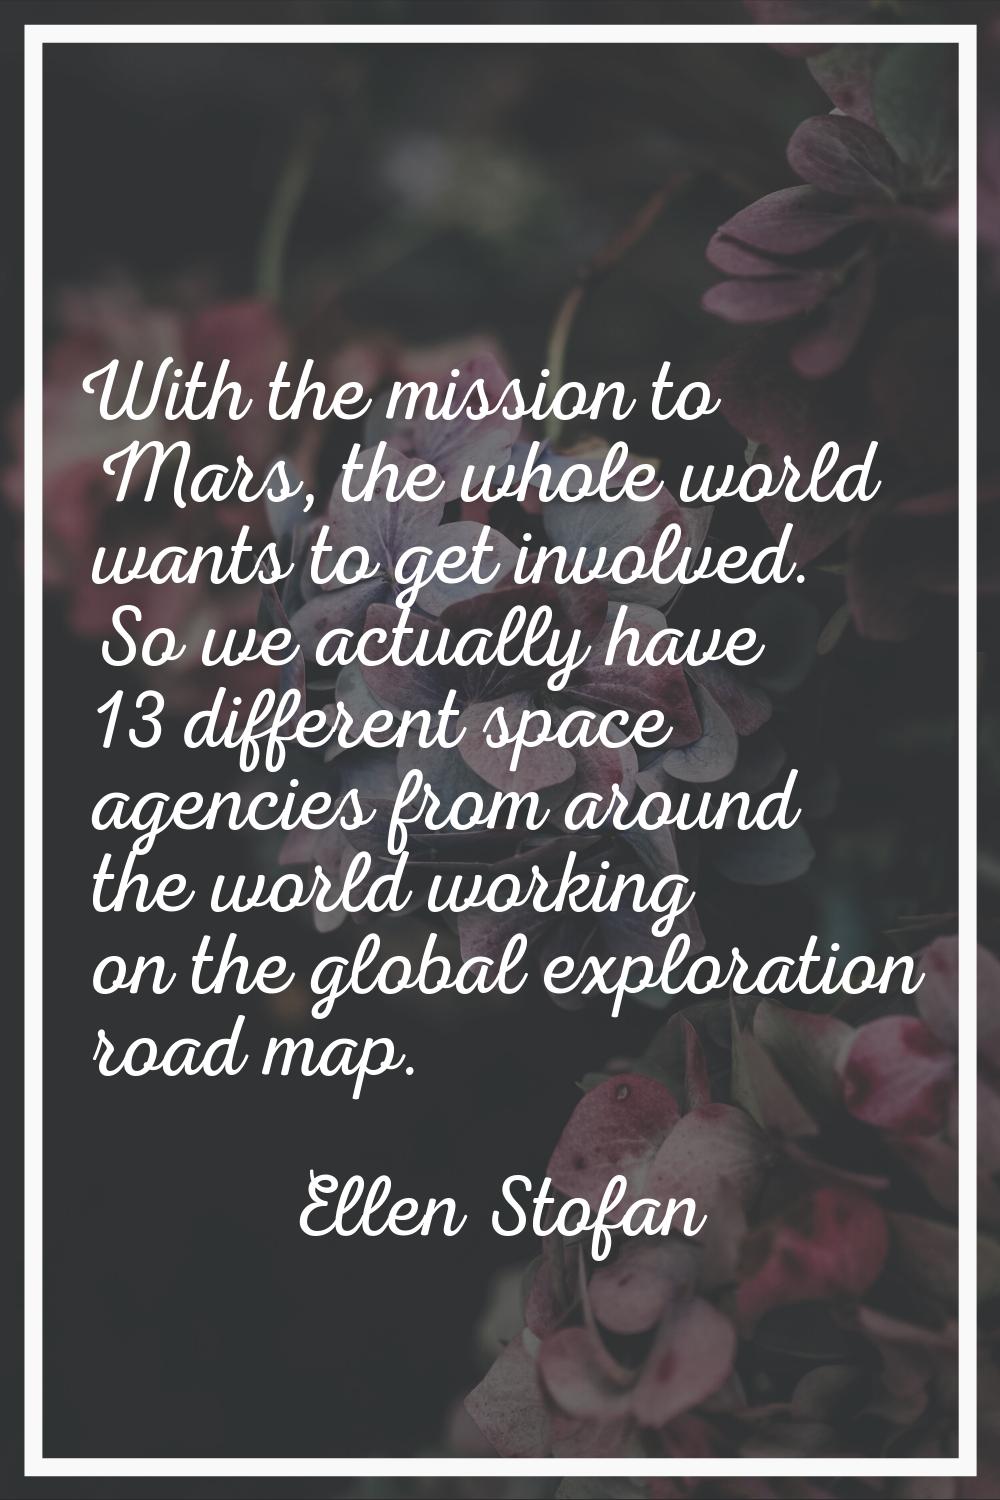 With the mission to Mars, the whole world wants to get involved. So we actually have 13 different s